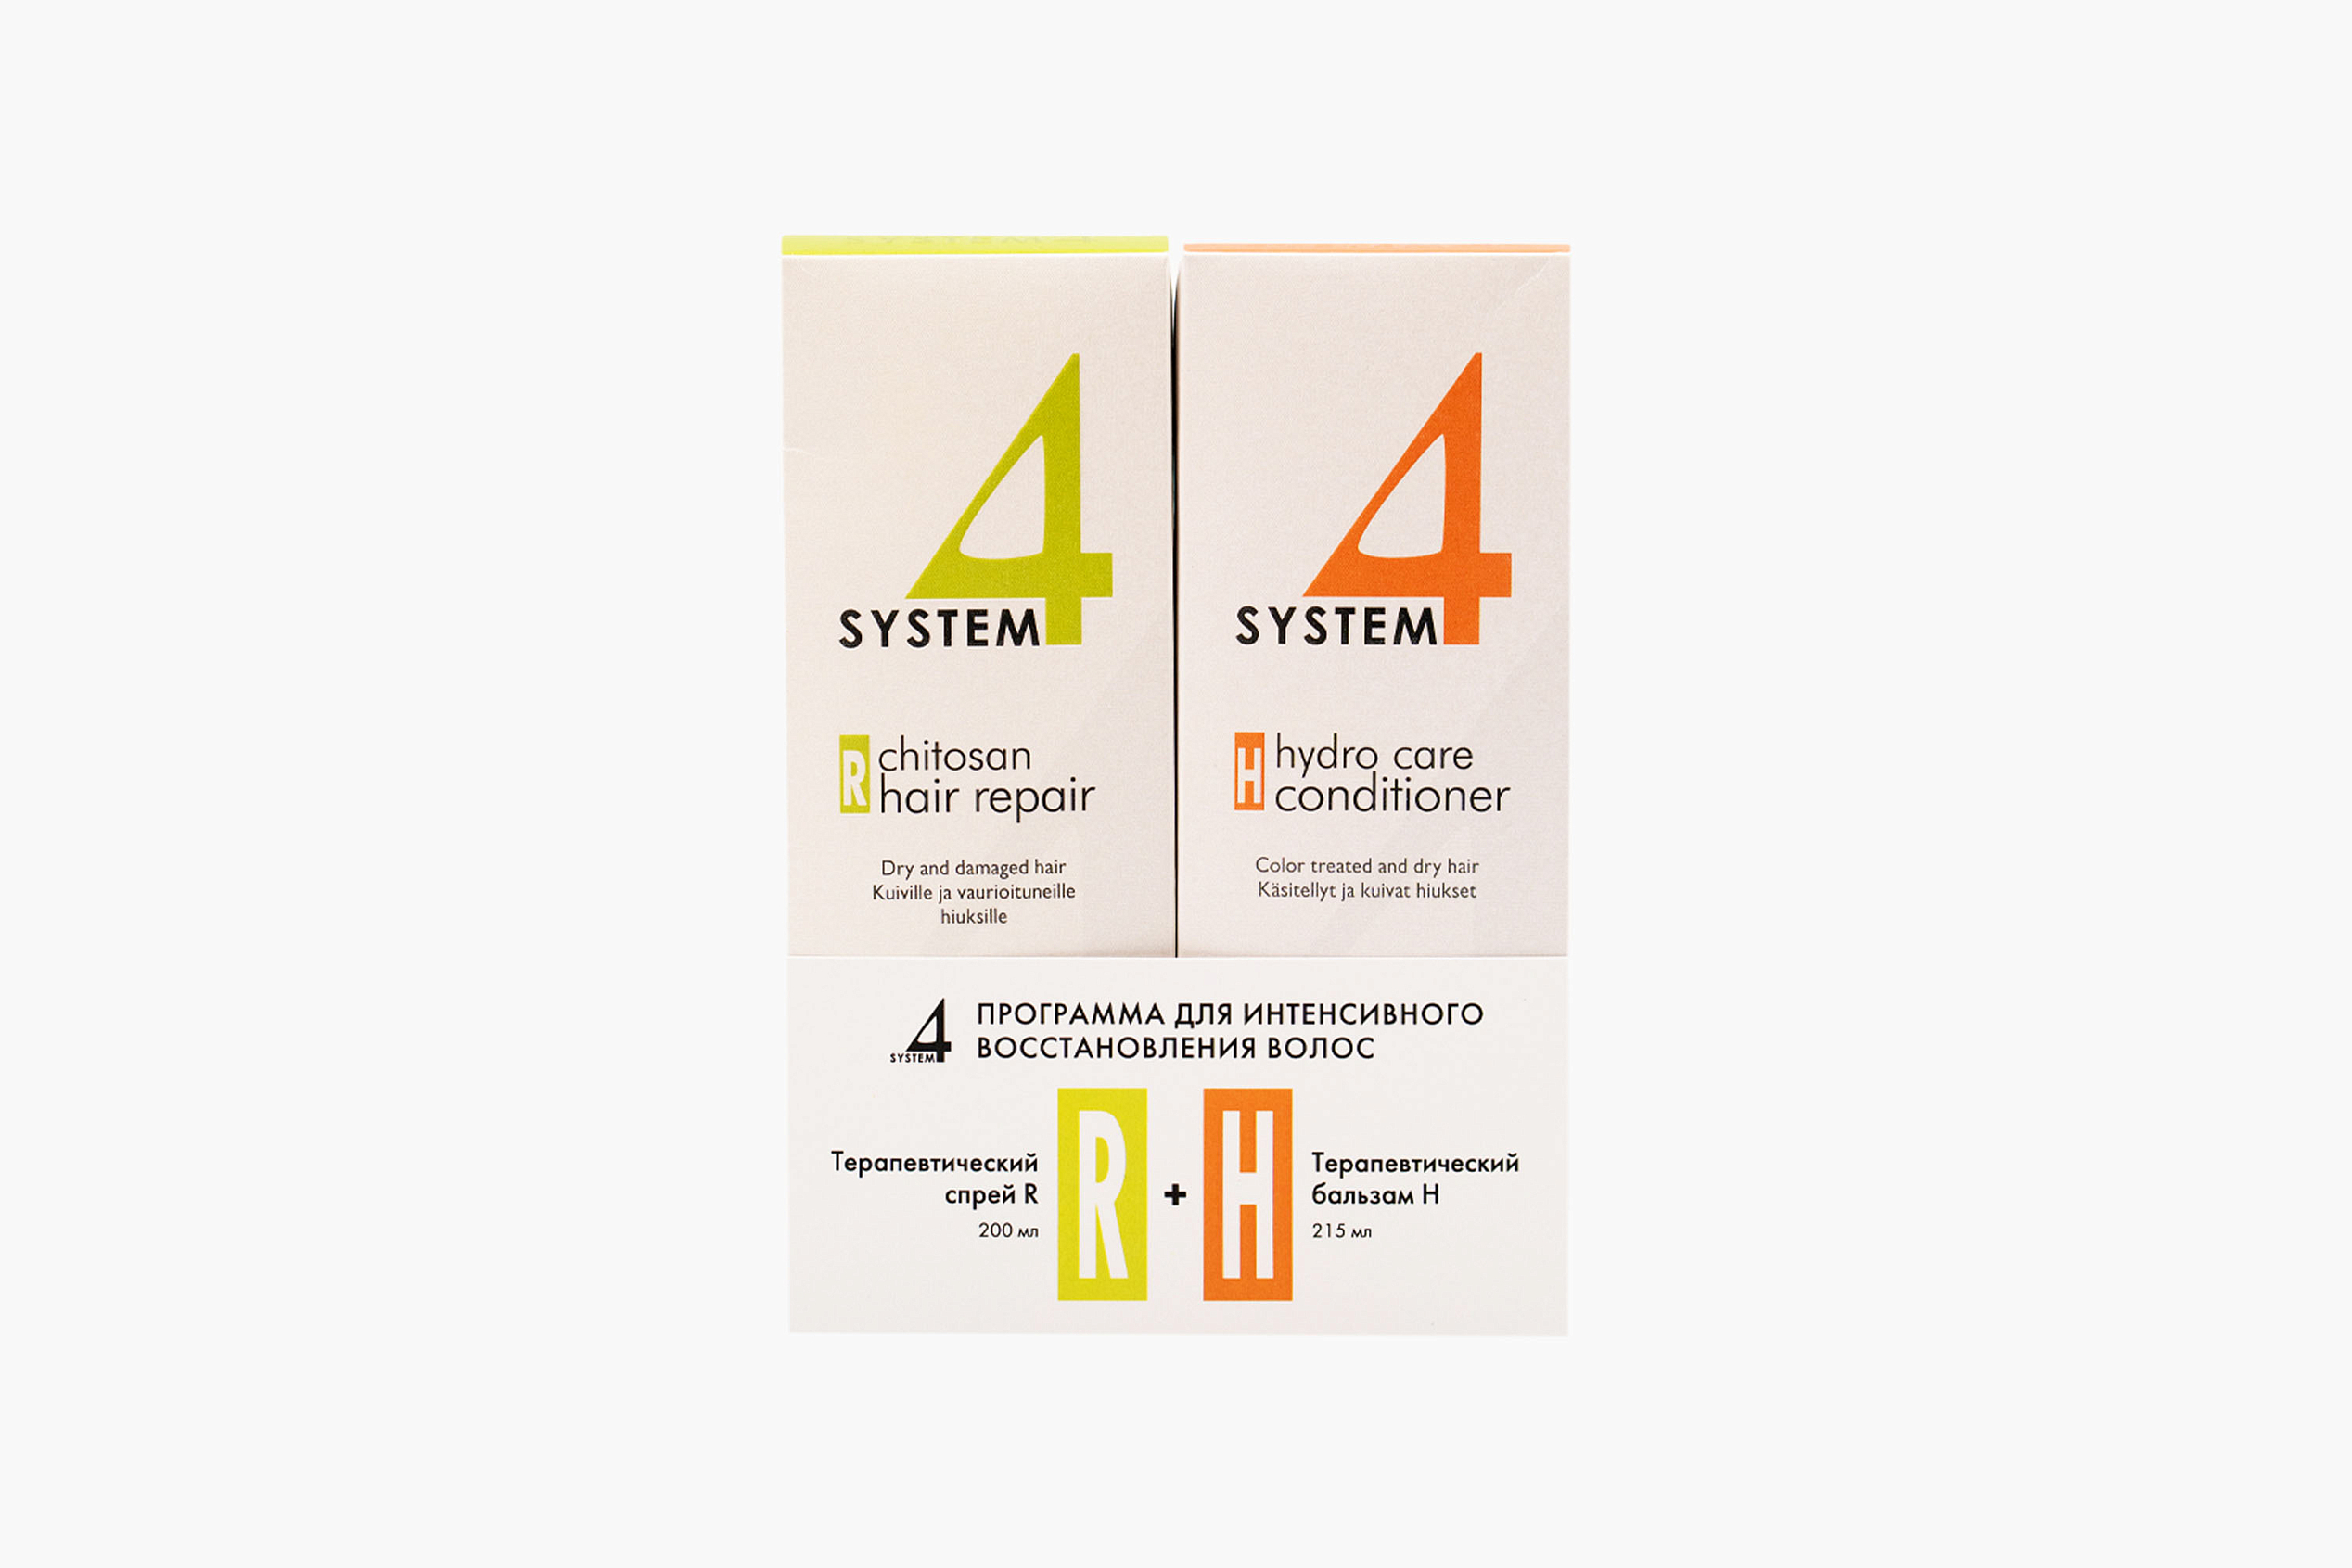 System 4 R Chitosan Hair Repair + Hydro Care Сonditioner Н фото 1